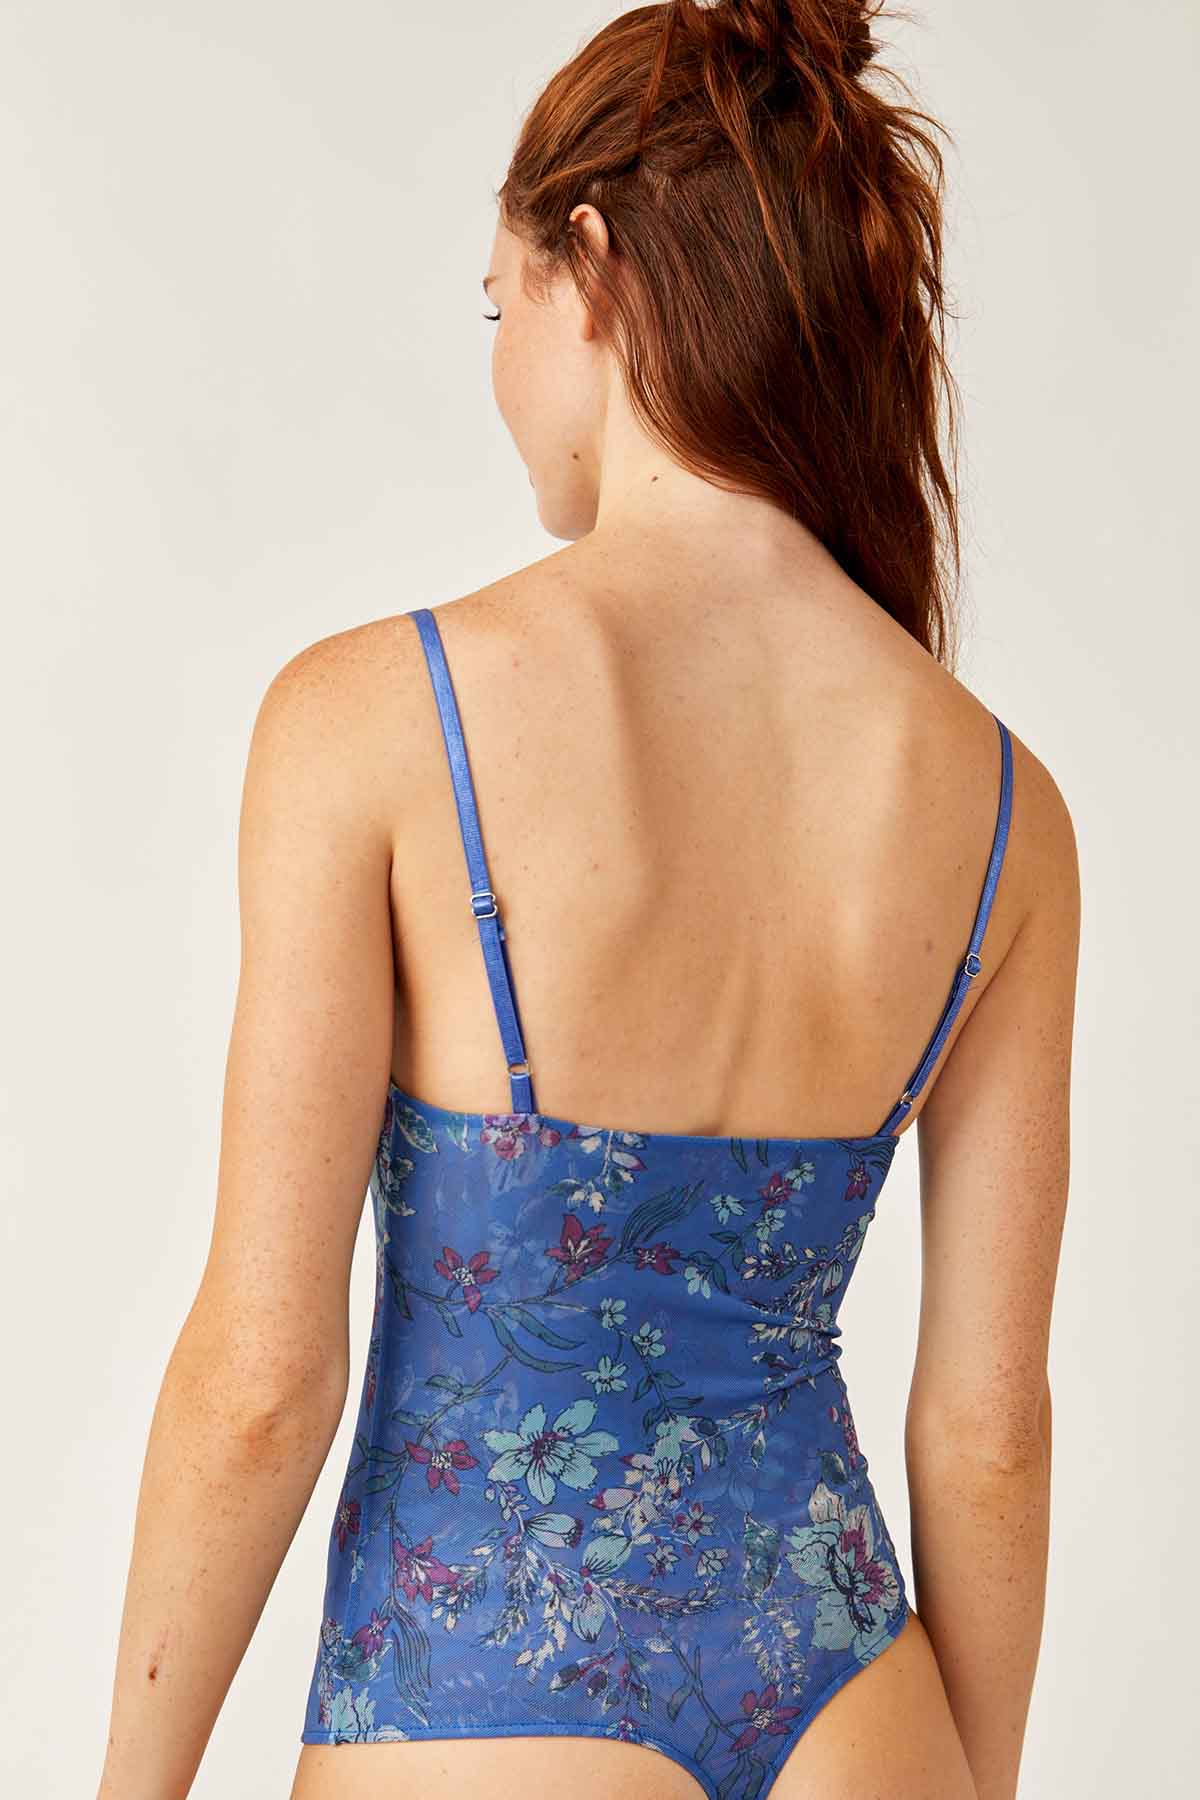 Free People - Printed Night Rhythm Bodysuit - Floral Combo - Back